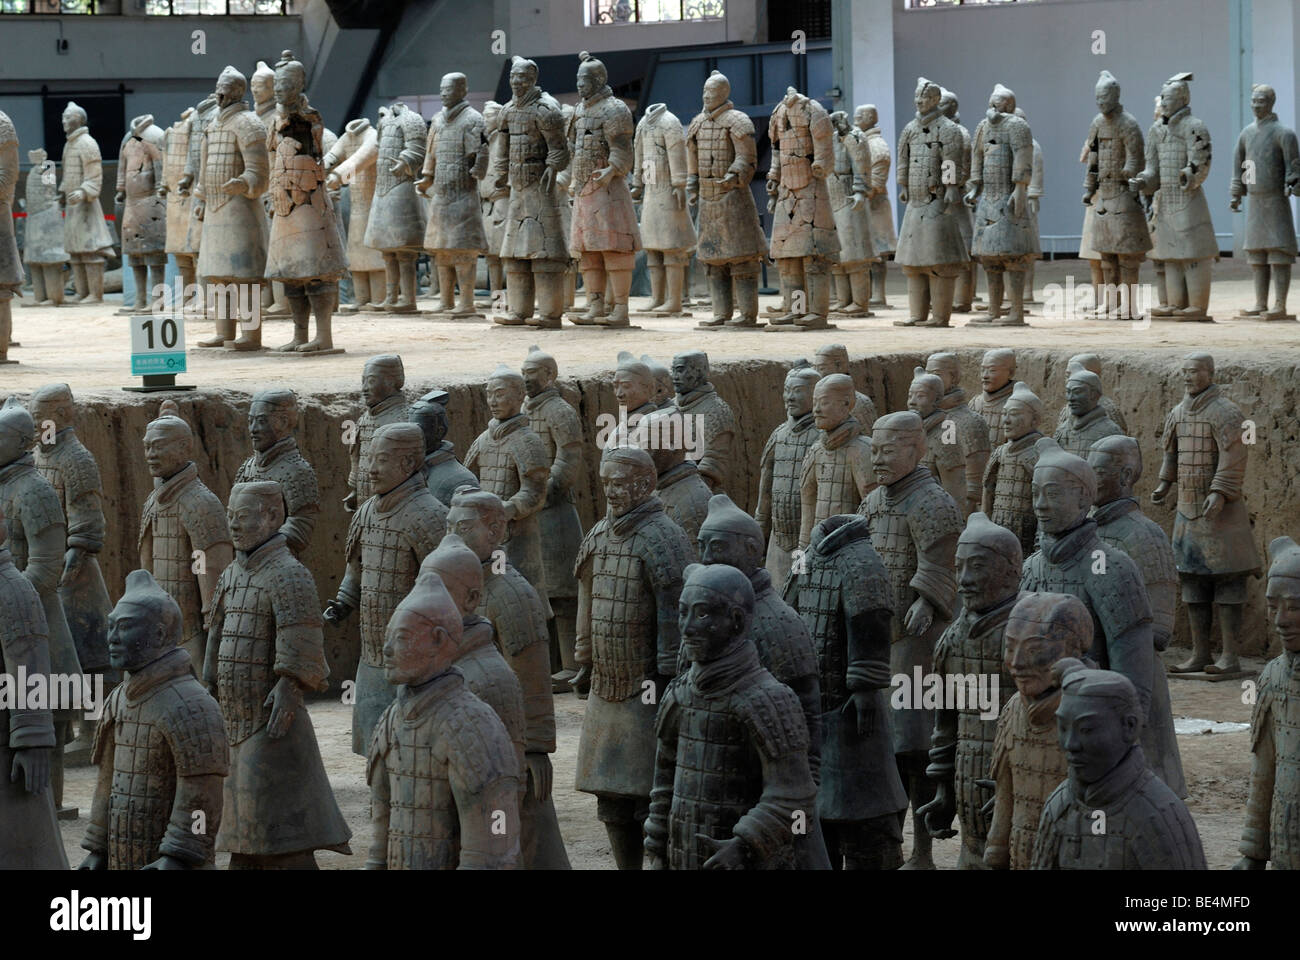 Terracotta army, part of the grave complex, hall 1, mausoleum of the 1st Emperor Qin Shi Huang in Xi'an, Shaanxi Province, Chin Stock Photo